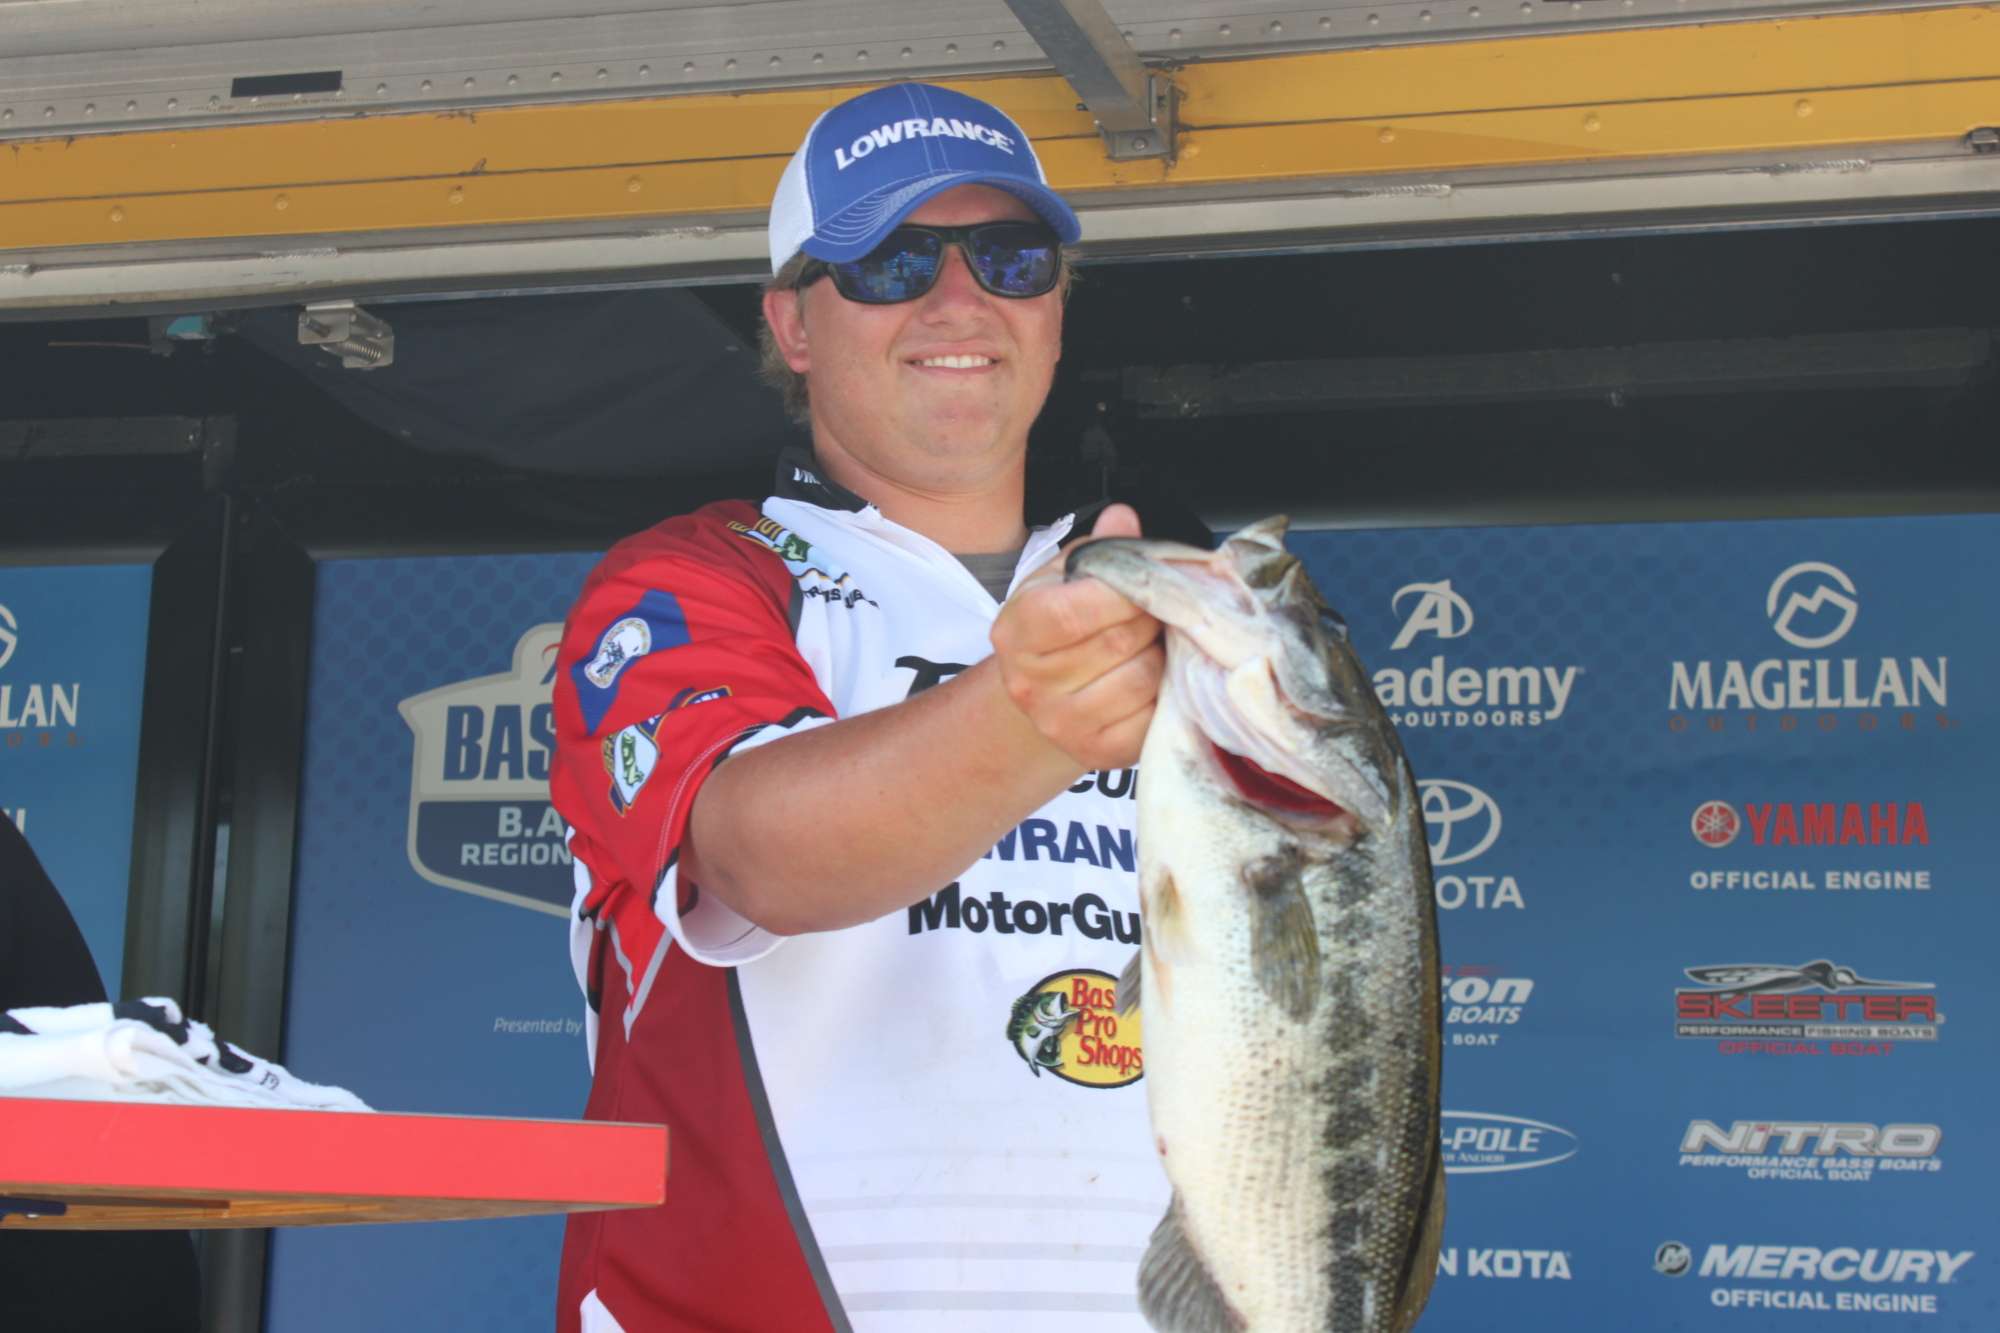 And then there were bass! Thereâs Travis Lugar of Team West Virginia whoâs in third place among non-boaters with six bass over two days weighing 11-14. This 5-pound, 1-ounce biggunâ started the day off right!